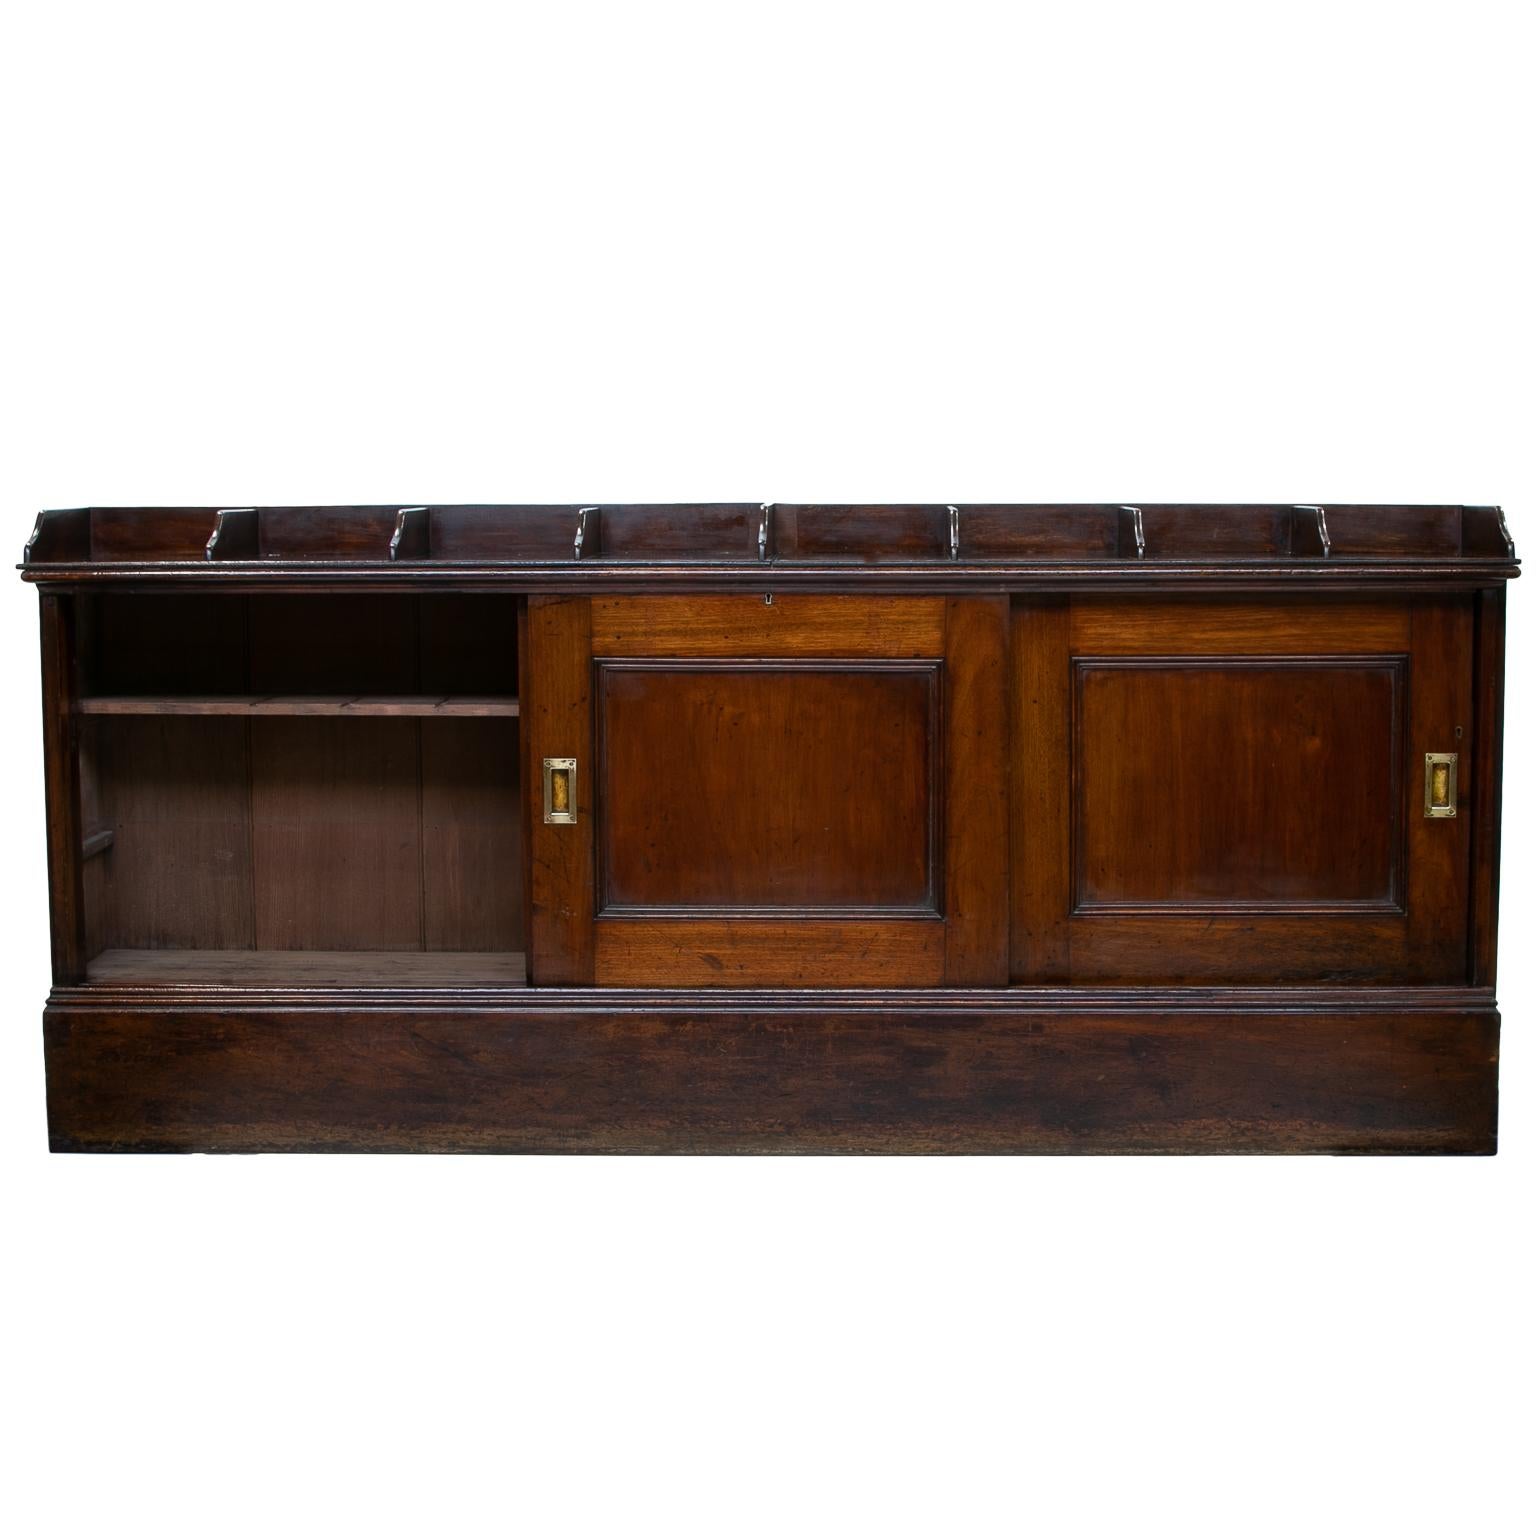 English office cabinet or shops cabinet
A fantastic Edwardian era office cabinet or called shops cabinets. The top divided into eight sections. Filing or shirts. Great cabinet for a clothing store. Below are the sliding doors revealing a cupboard